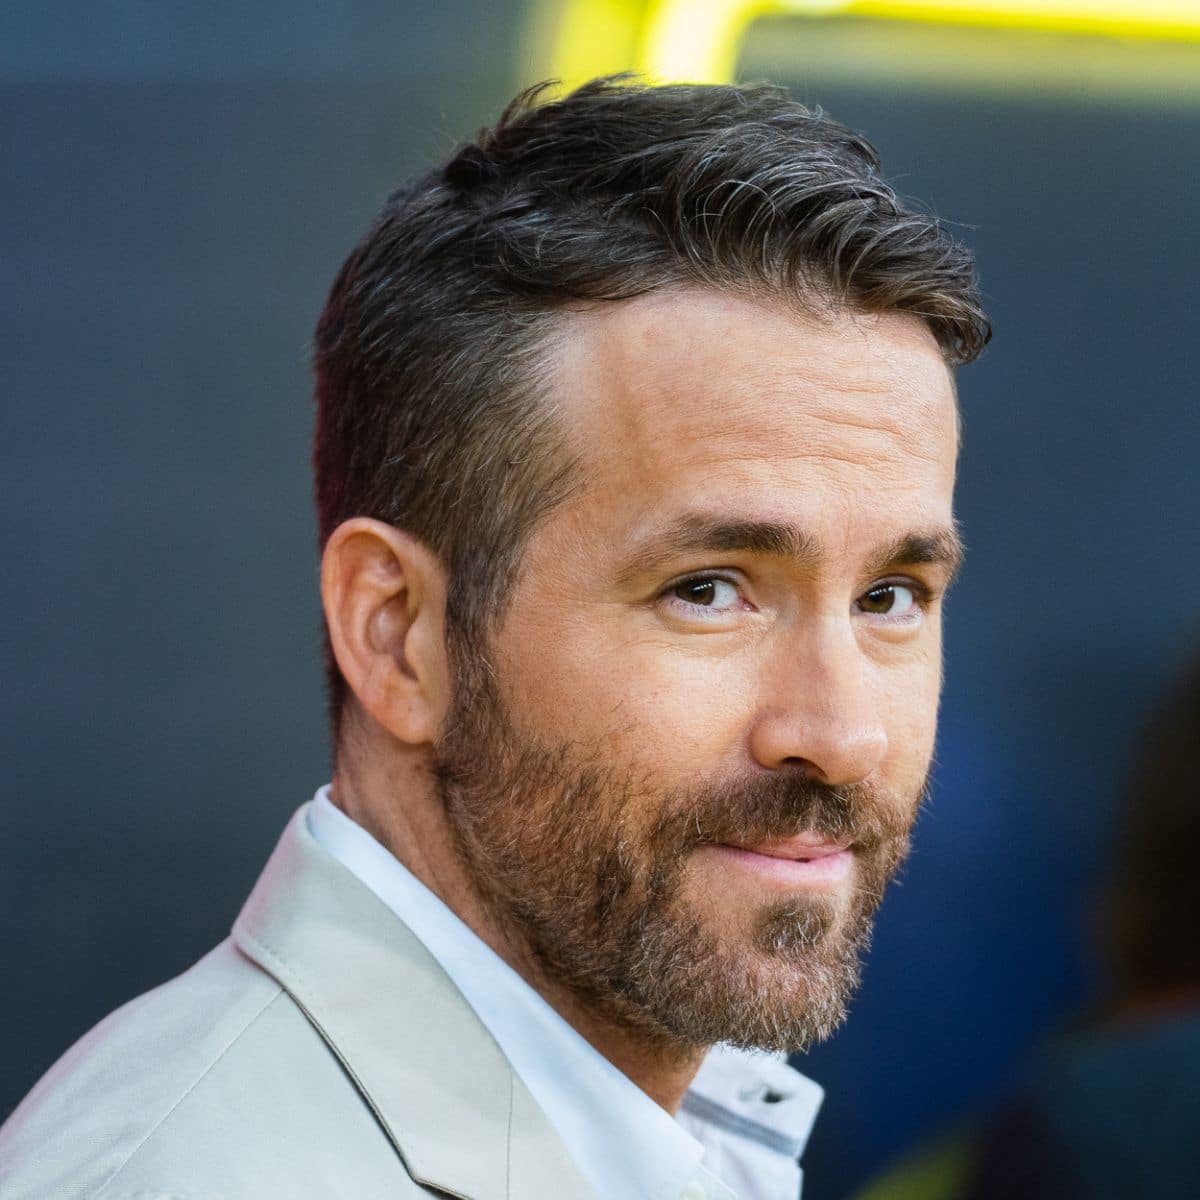 The Appeal of the Ryan Reynolds Haircut